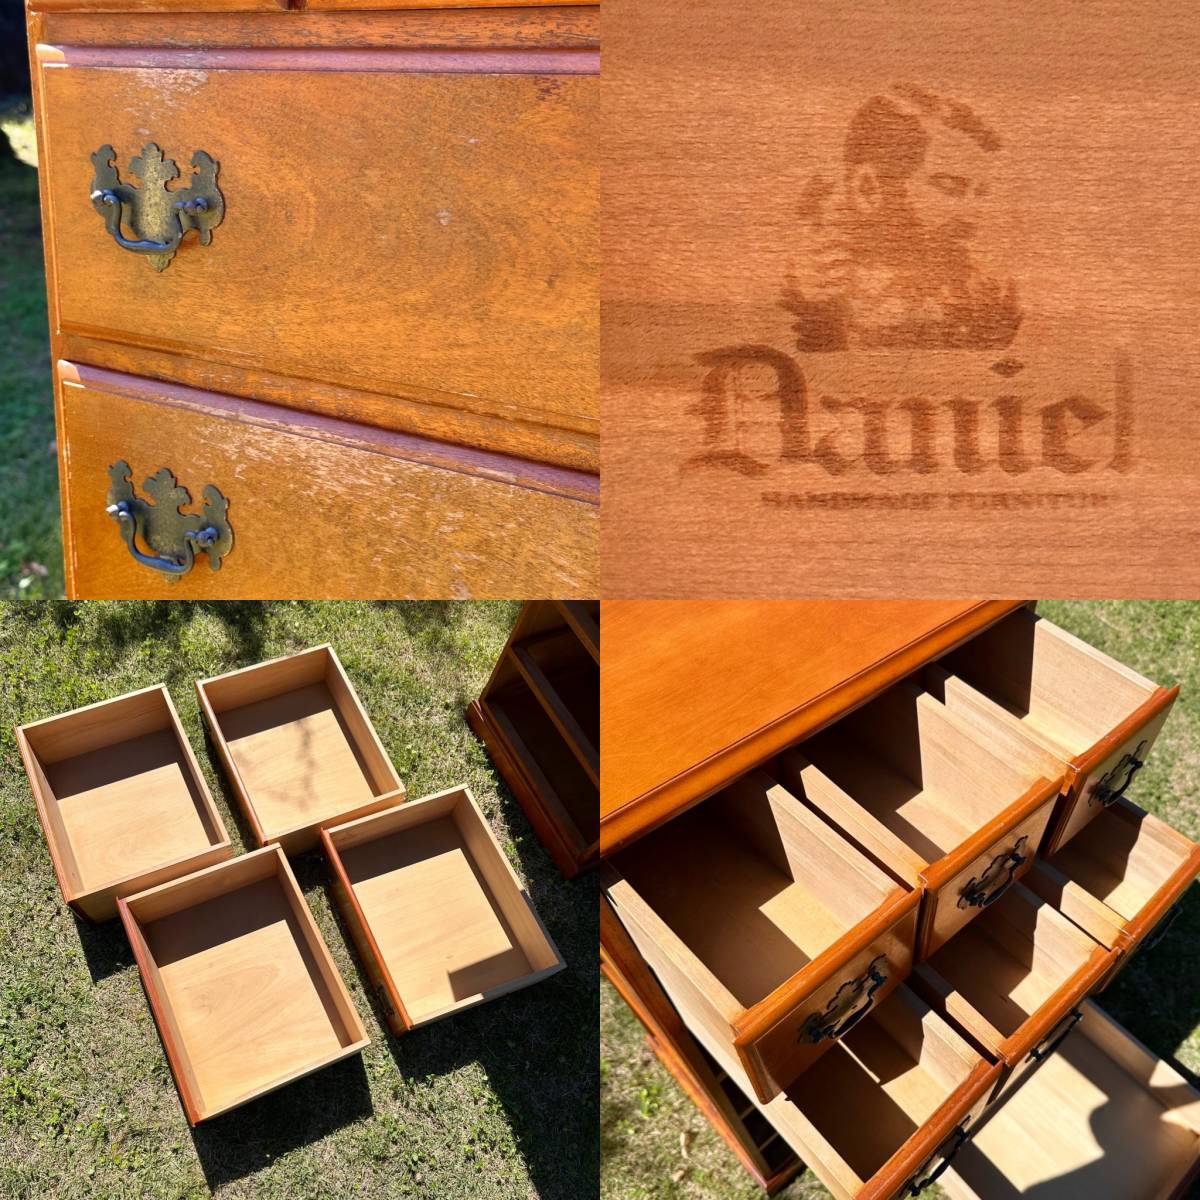  Yokohama Classic furniture Daniel Daniel early american chest 6 step 10 cup regular price approximately 35 ten thousand jpy Country style drawer Western-style clothes chest 